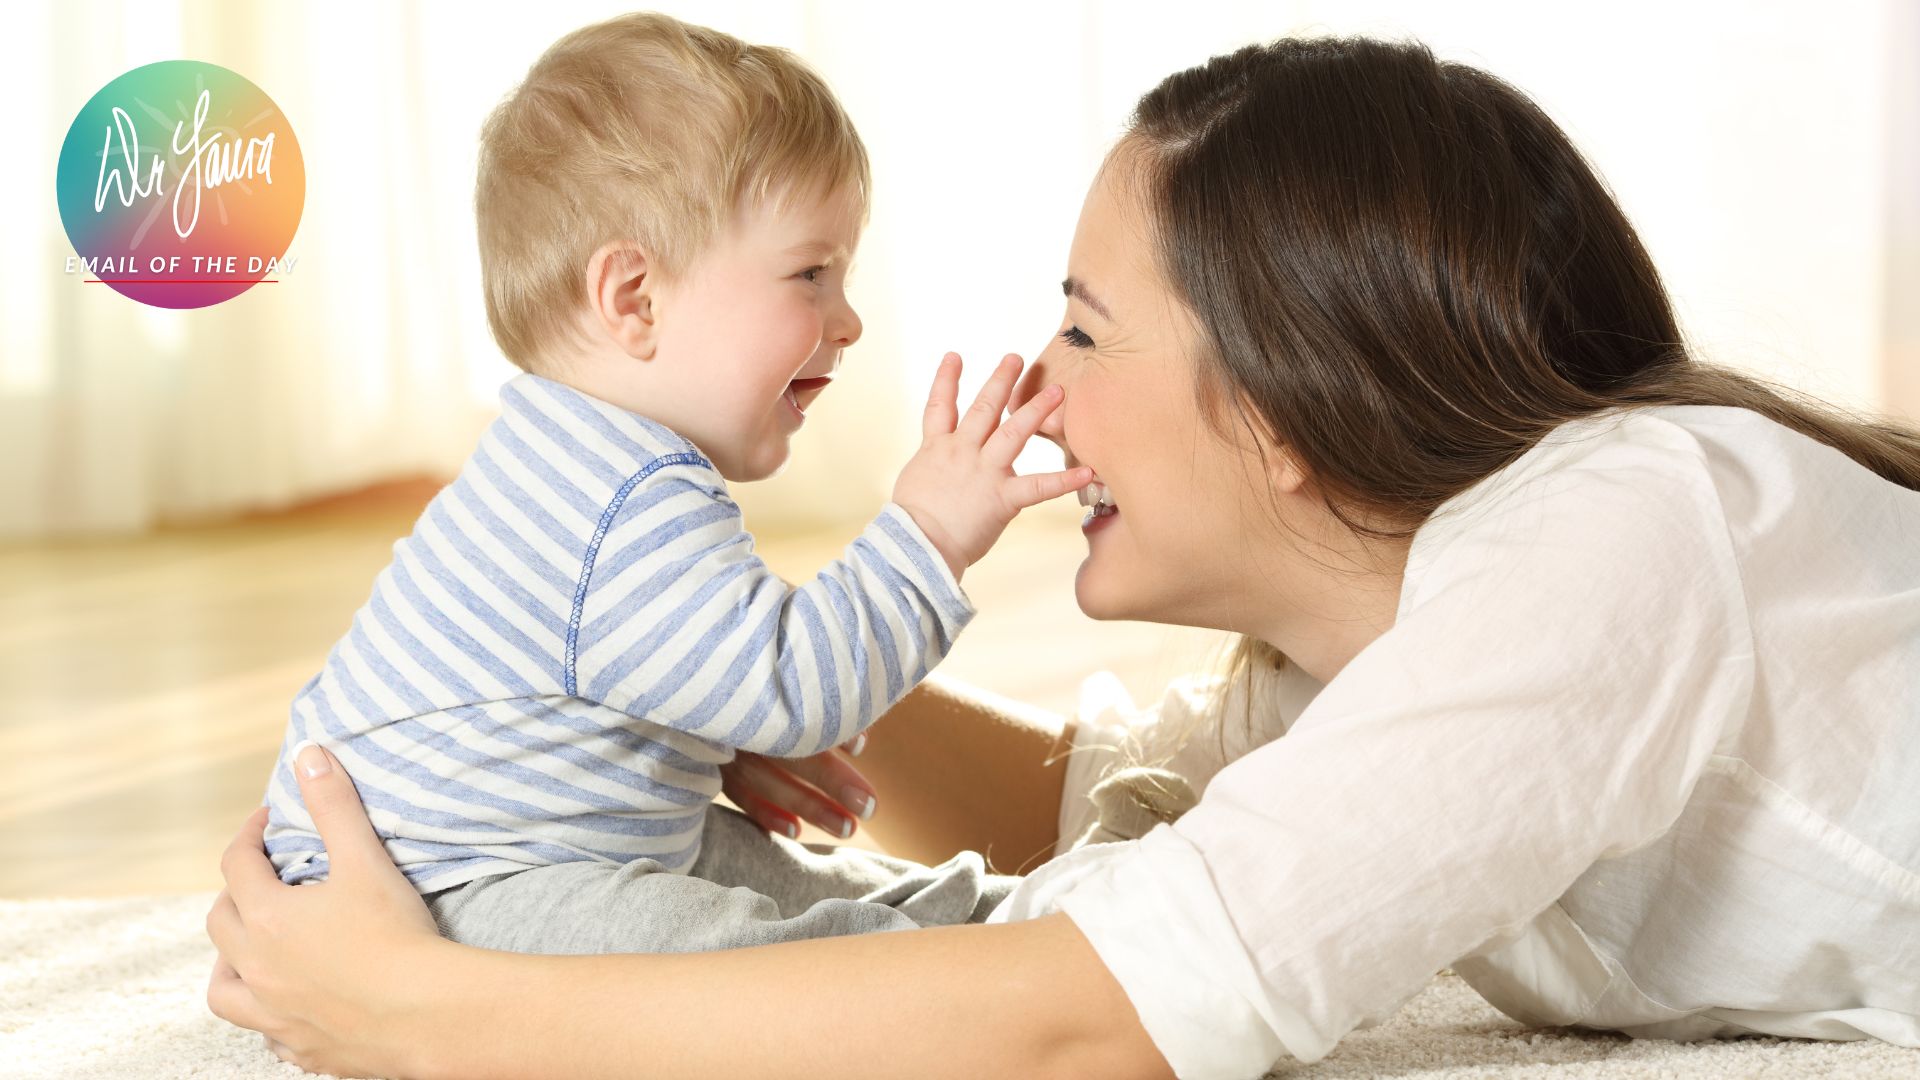 Smiling woman laying down embraces baby sitting down and touching the woman's nose